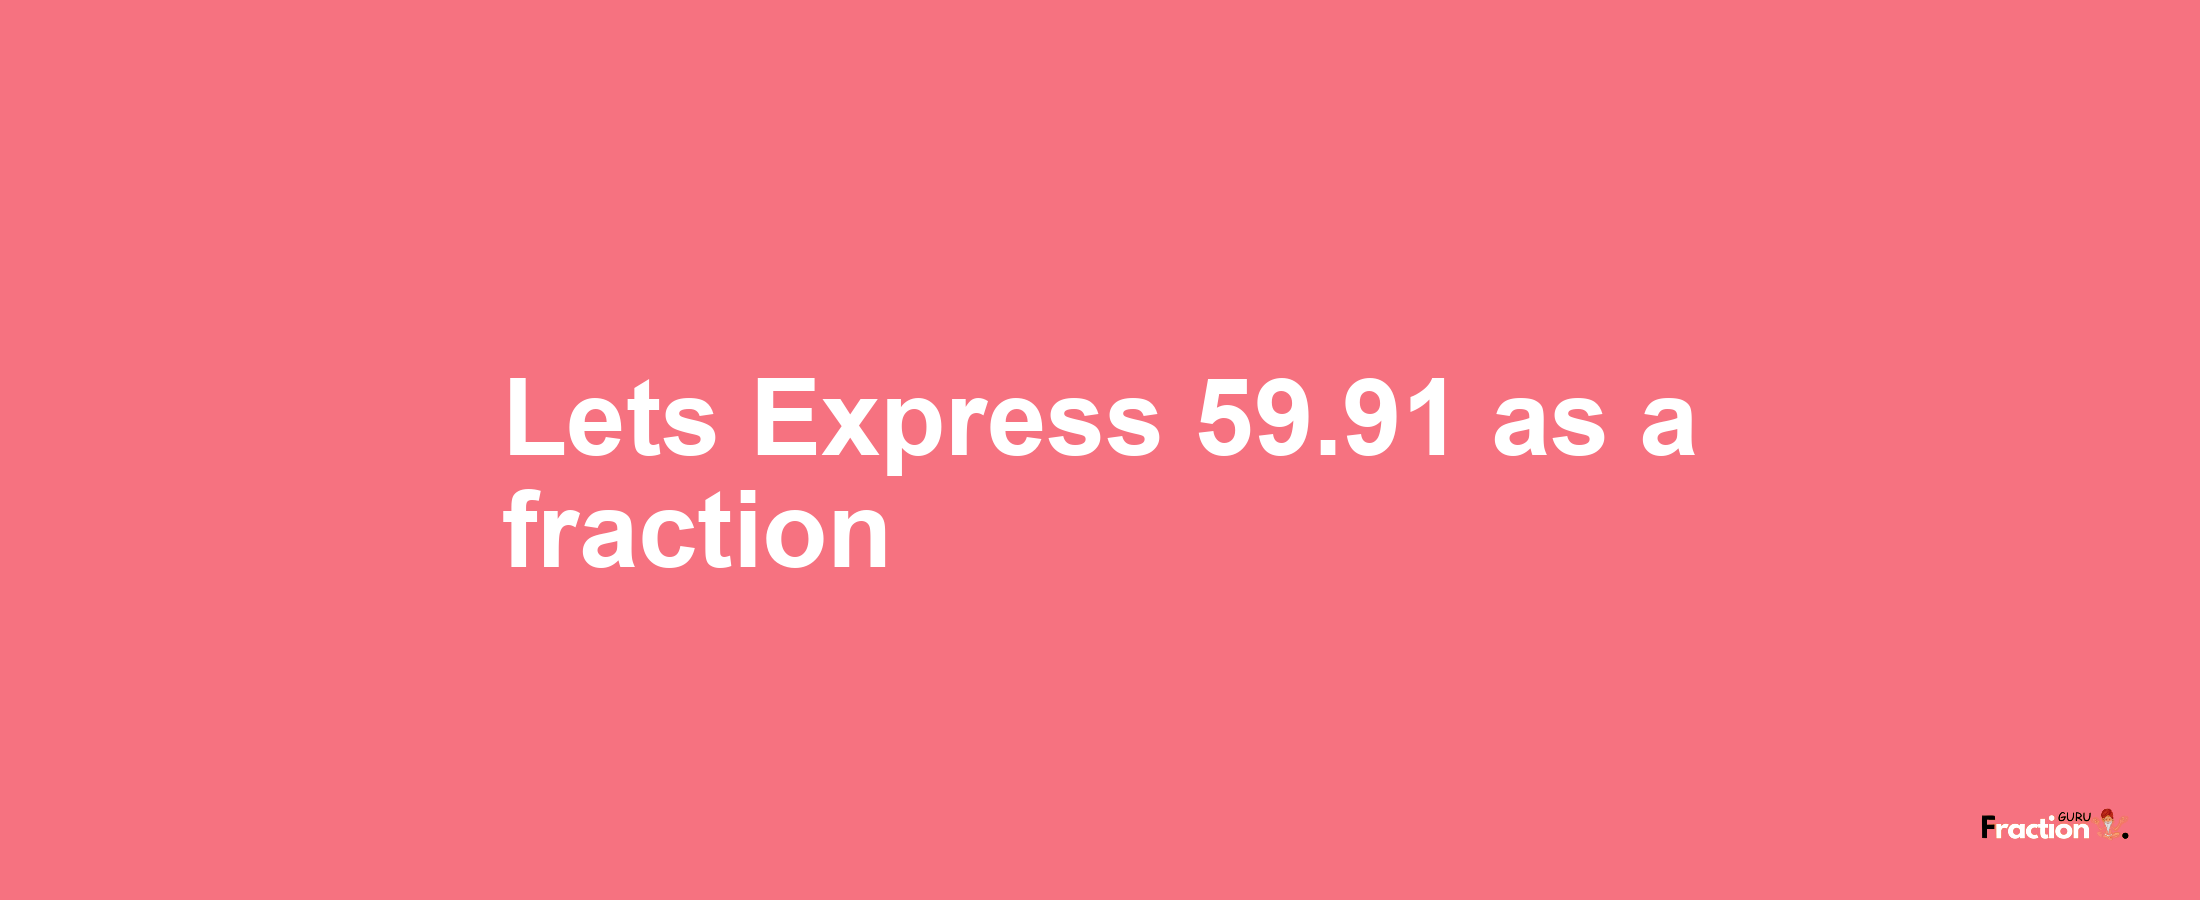 Lets Express 59.91 as afraction